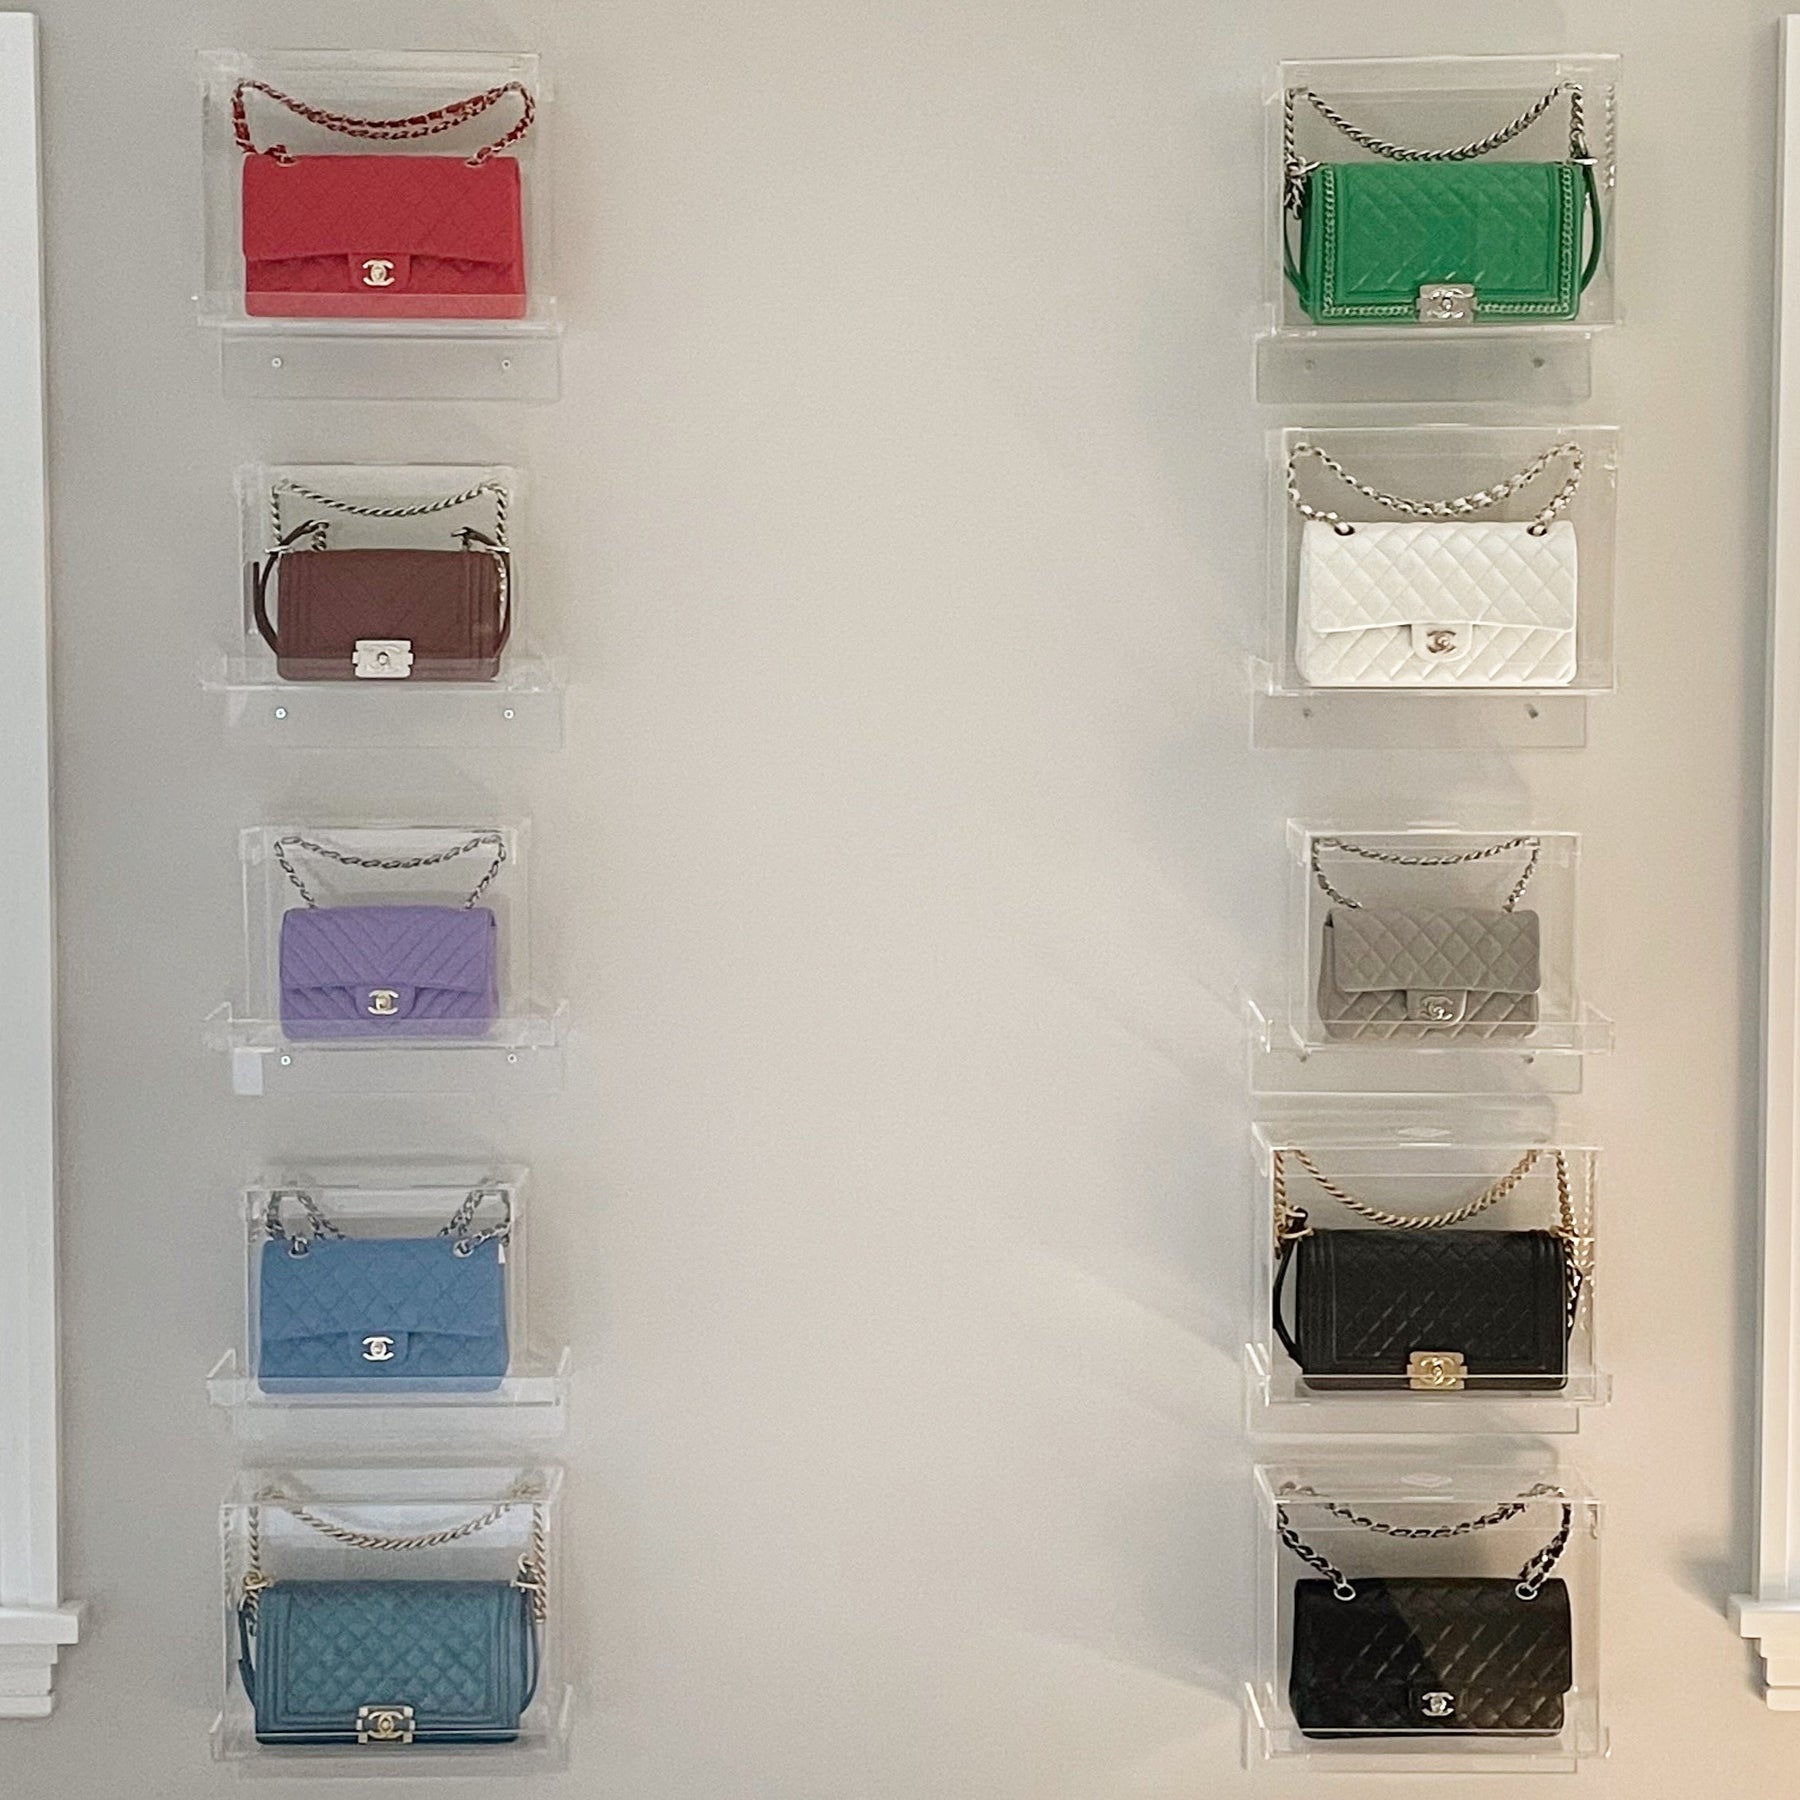 love these shelves for displaying all your bags!